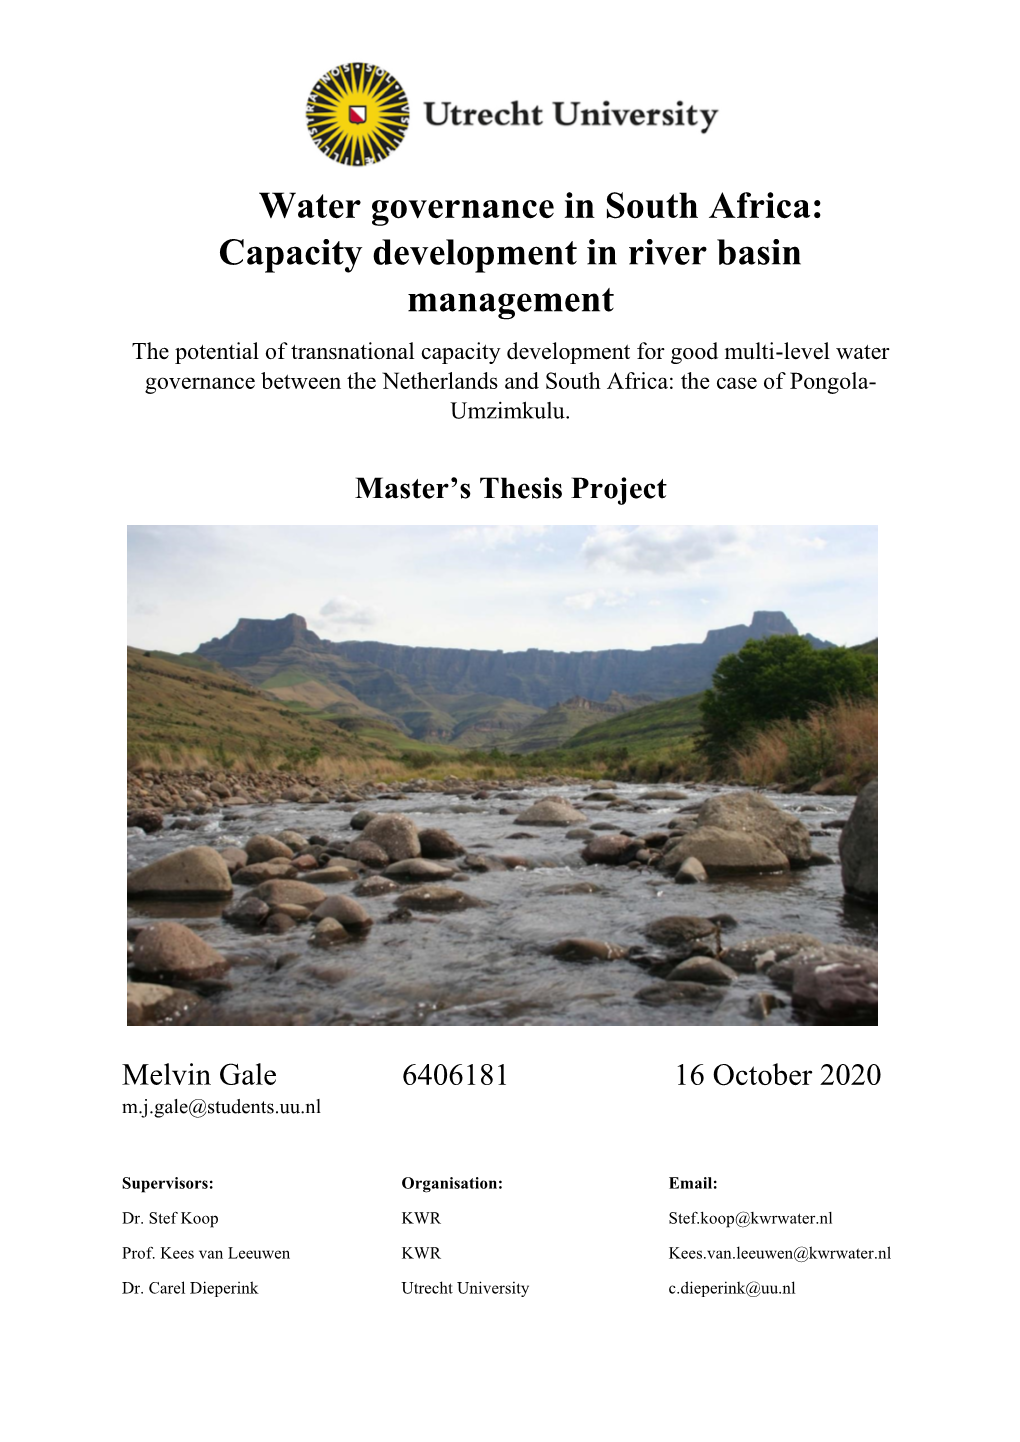 Water Governance in South Africa: Capacity Development in River Basin